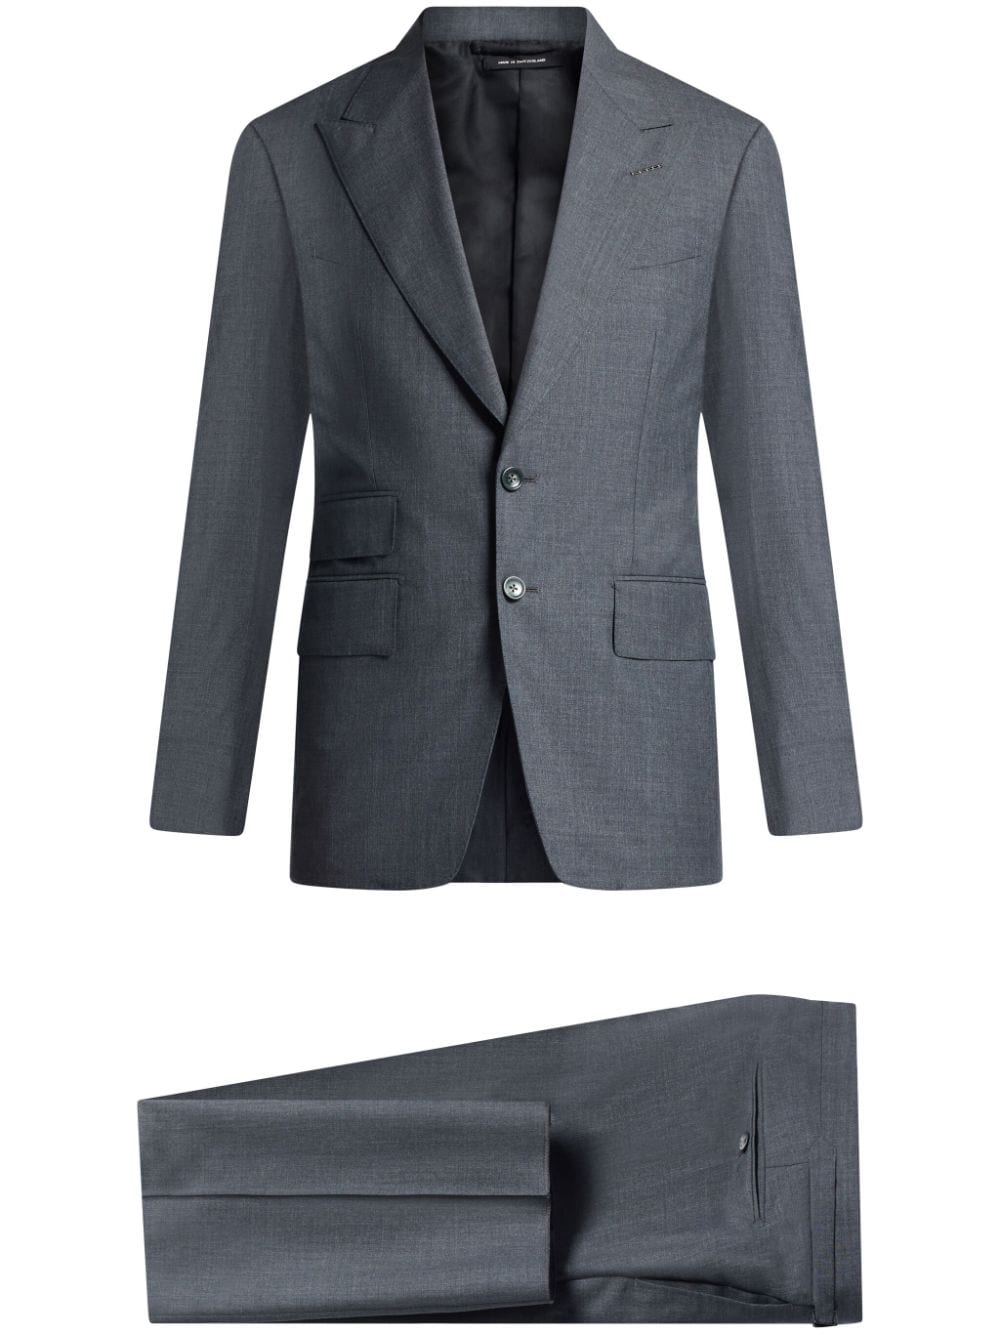 TOM FORD single-breasted wool suit - Grey von TOM FORD